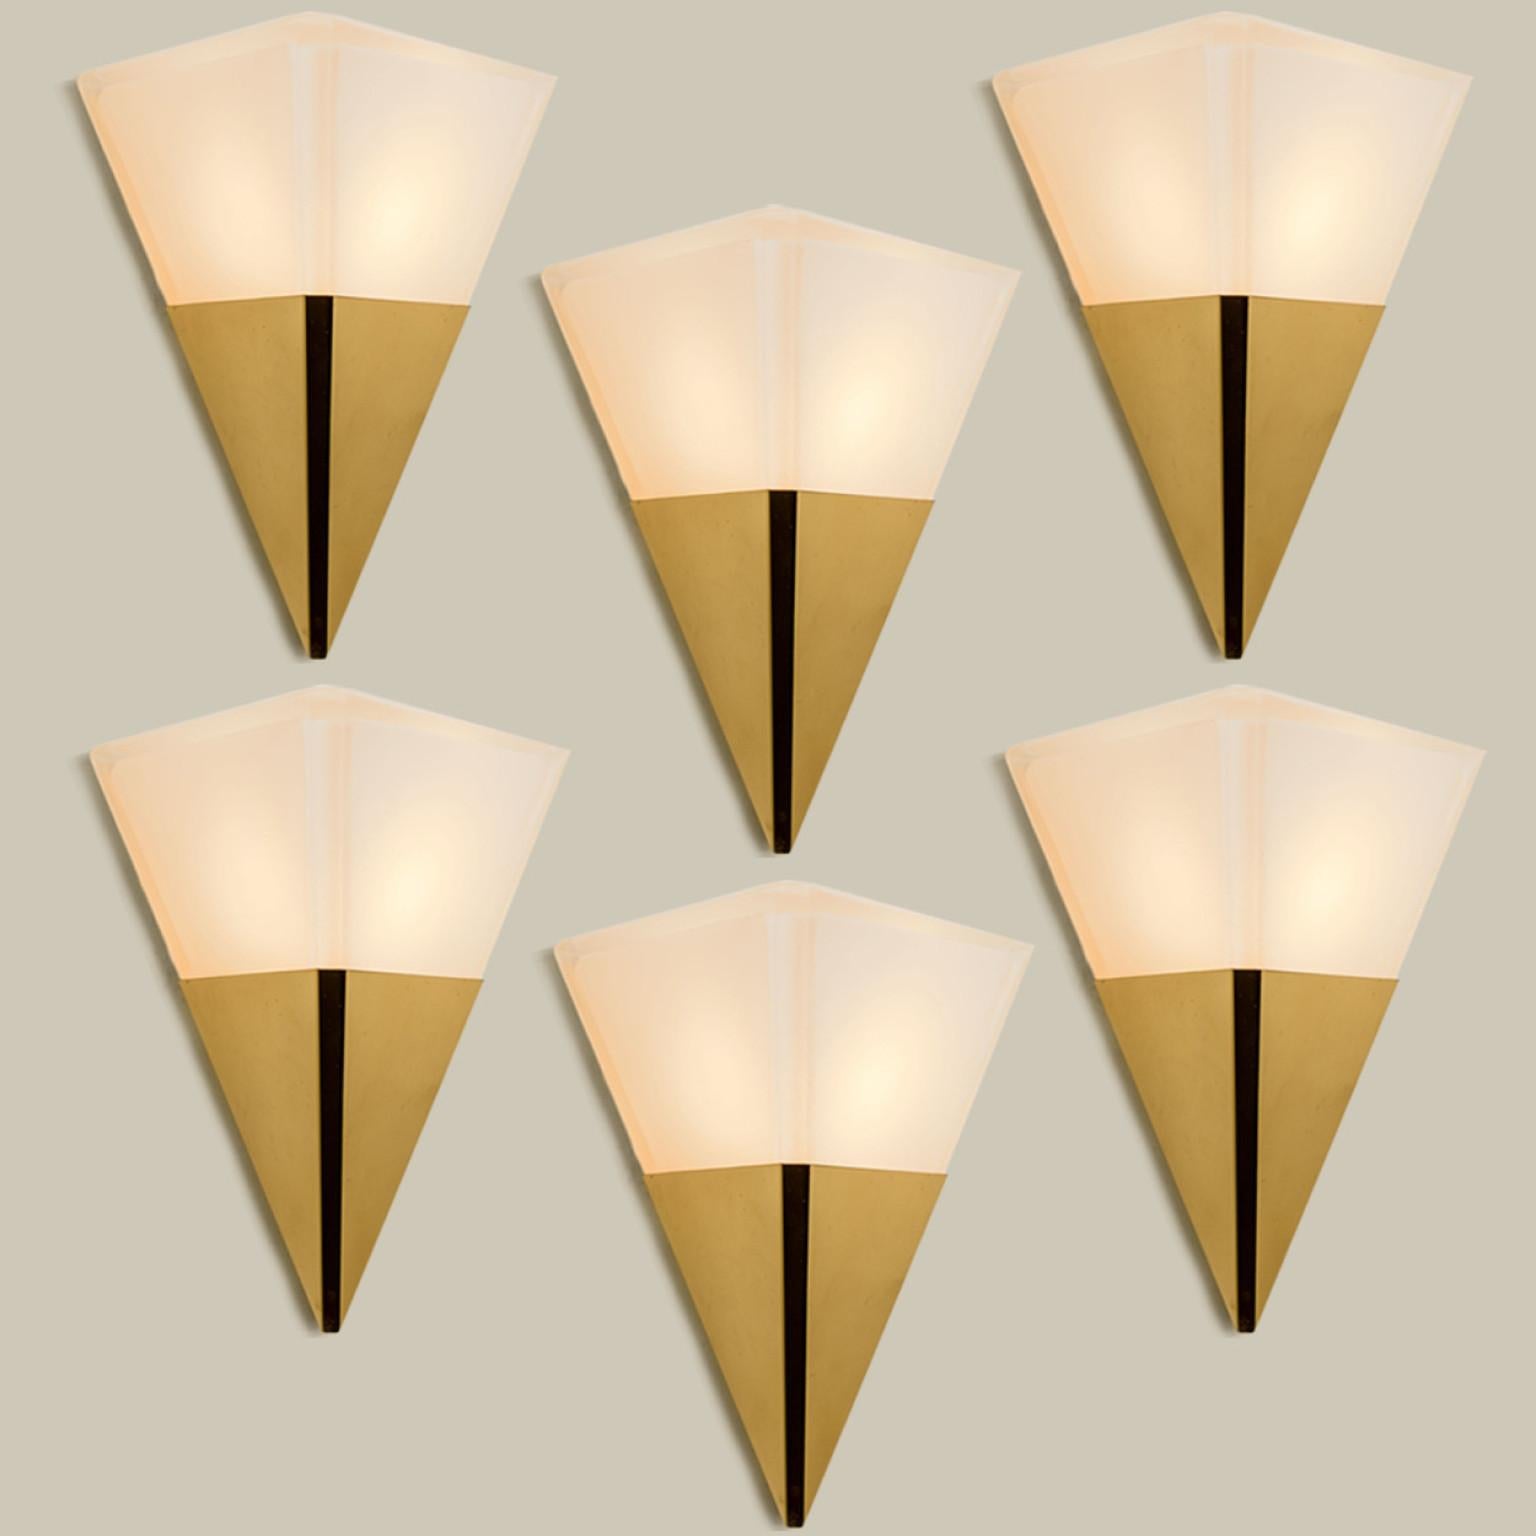 Pyramid shaped wall lights in white opaline glass with brass details. Manufactured by Glashütte Limburg in Germany during the 1970s. (early 1970s).

Nice craftsmanship. Minimal, geometric and simply shaped design.

Please note the price is for one